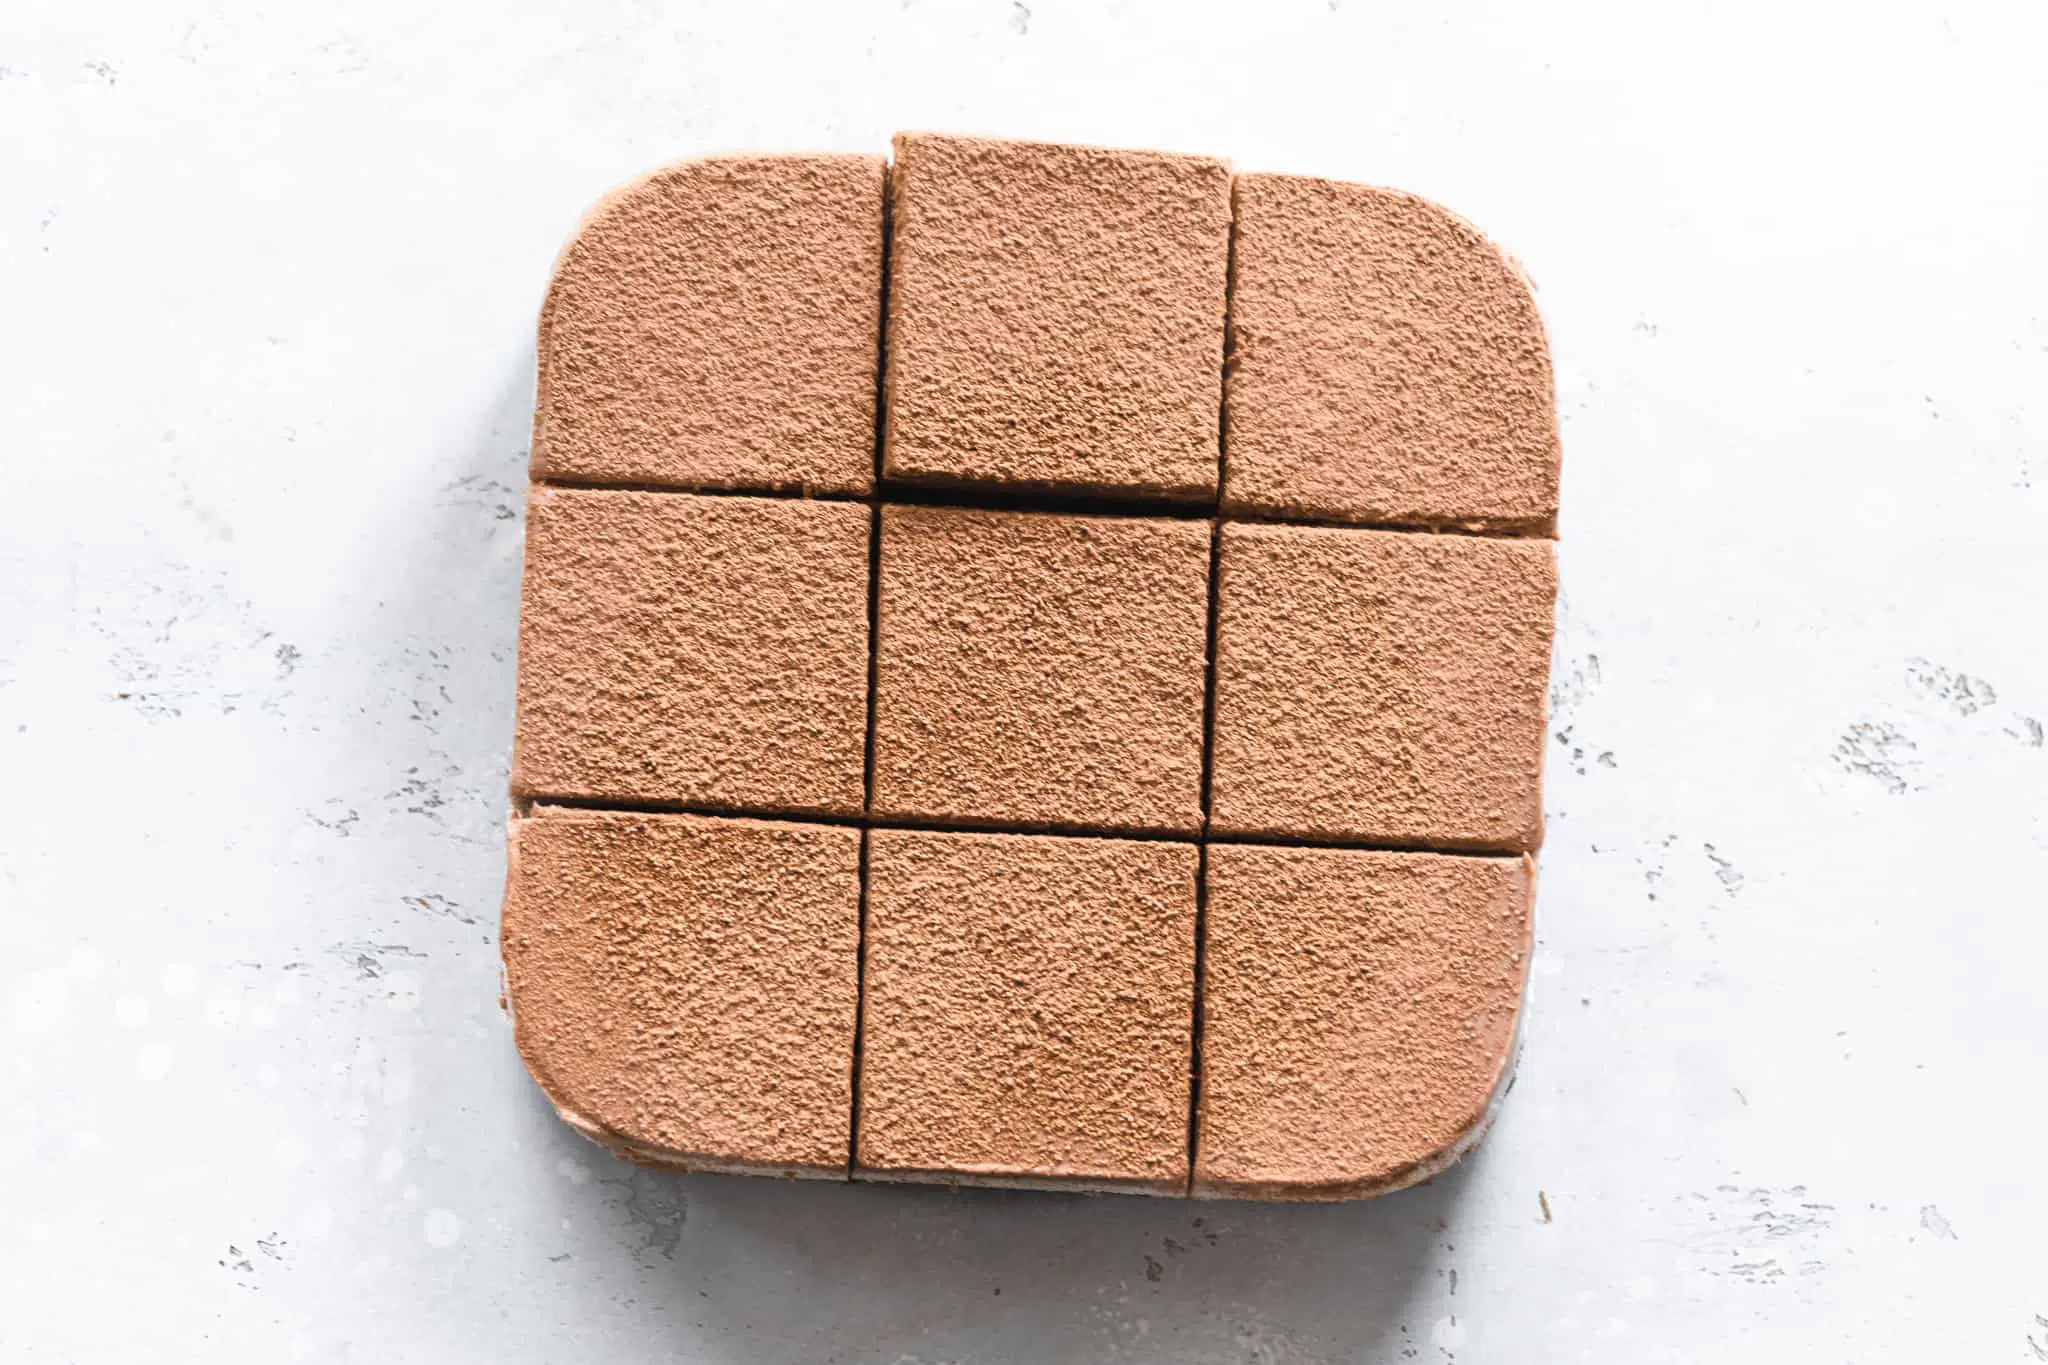 Flaylay of vegan chai latter cheesecake cut into cubes on grey stone surface